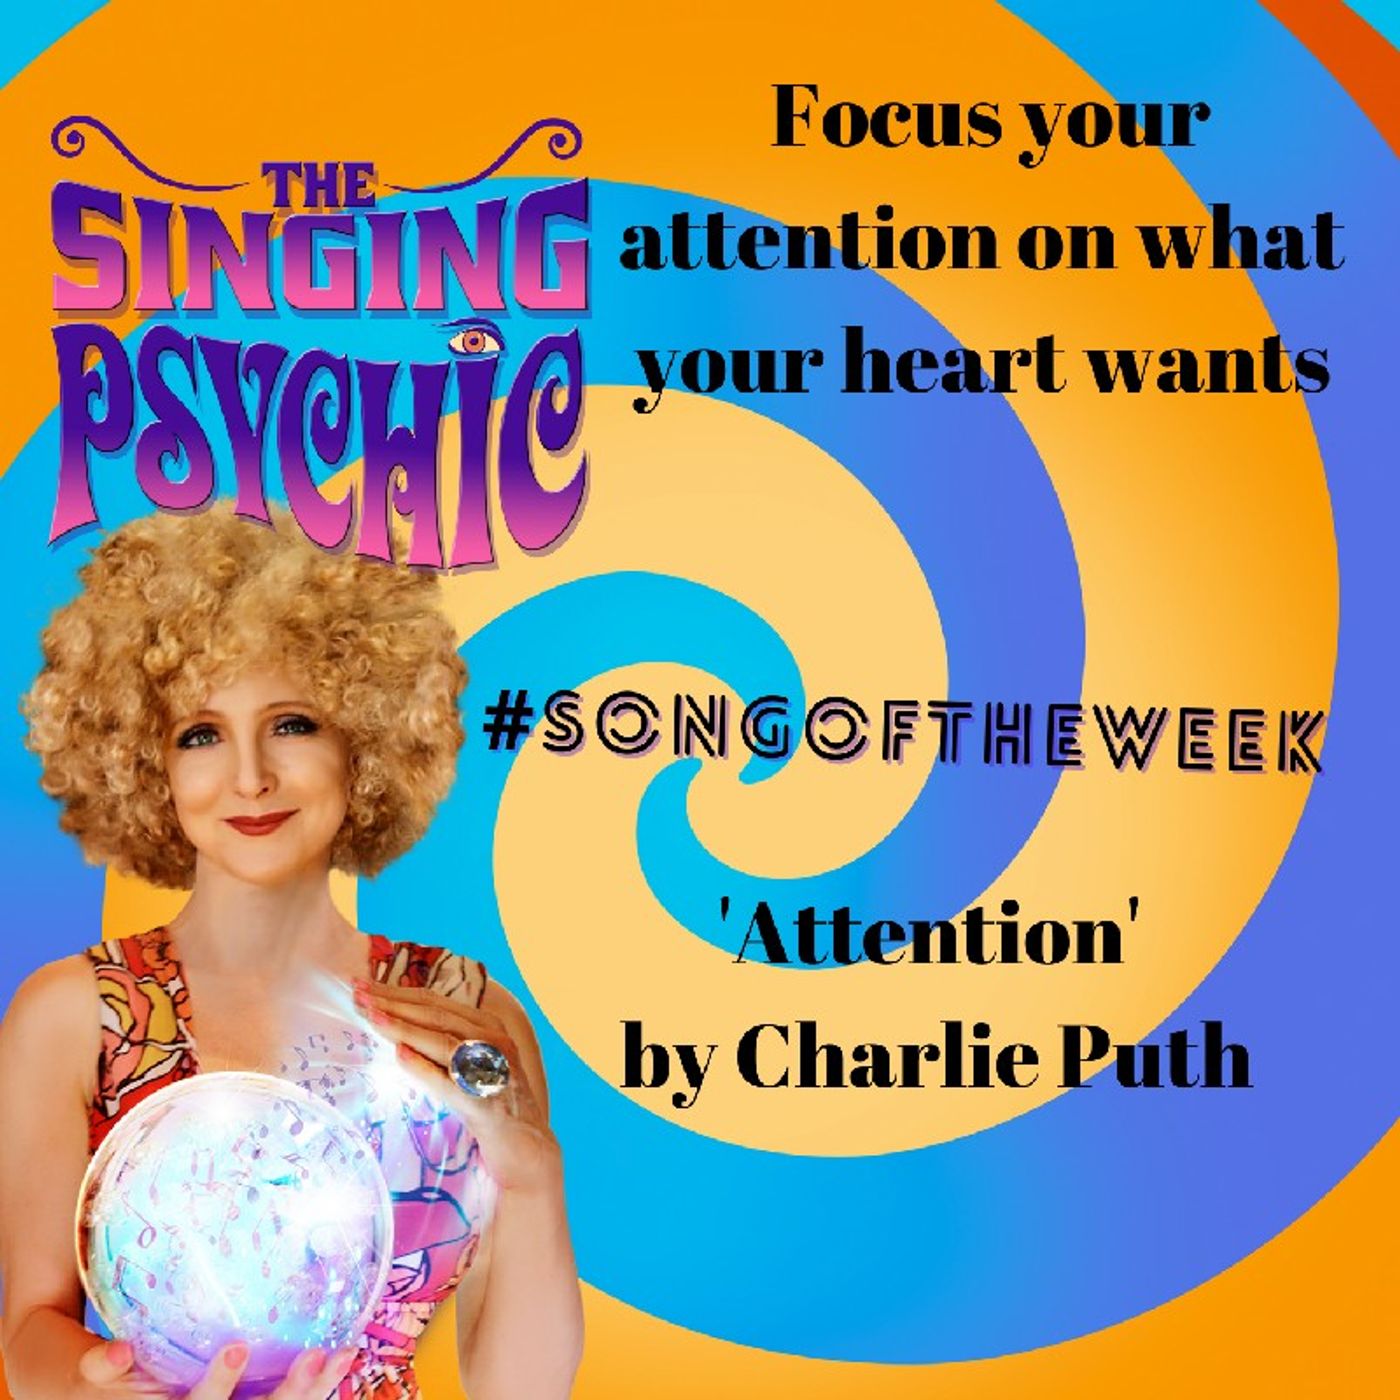 Attention By Charlie Puth Is #SongOfTheWeek - The Singing Psychic